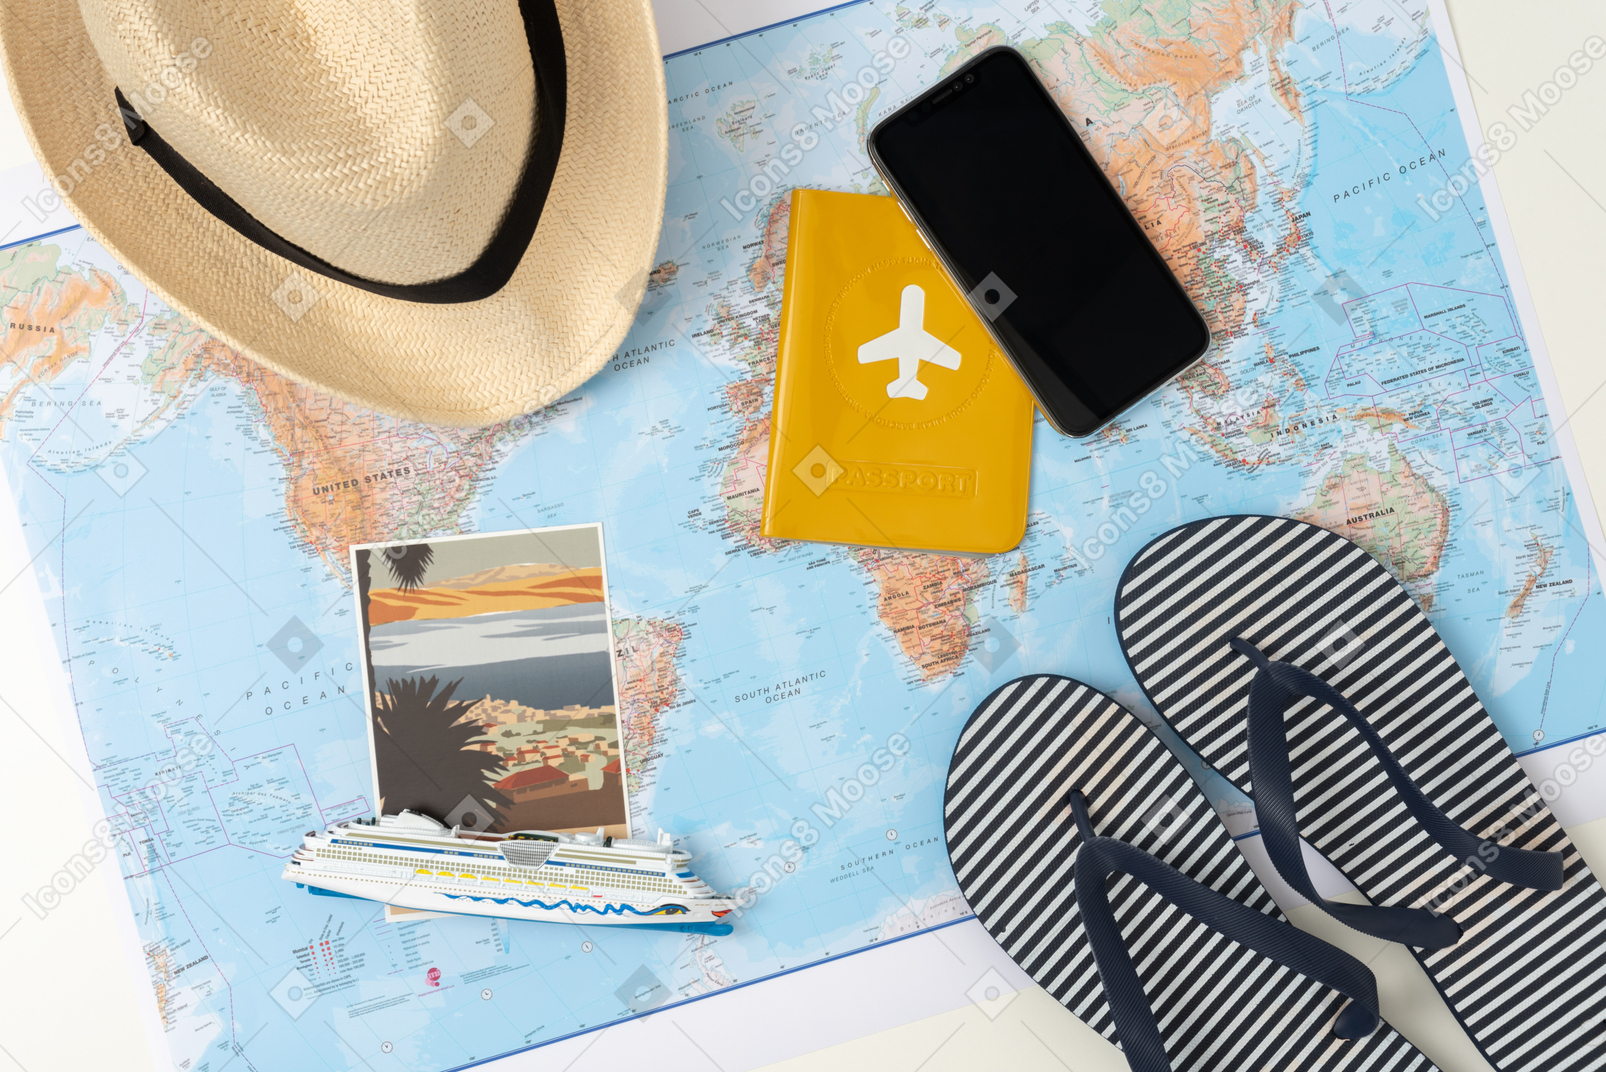 A passport, tiny ship model, flip-flops and a straw hat, all laid out beautifully over the world map, because i'm not just a tourist, but a designer